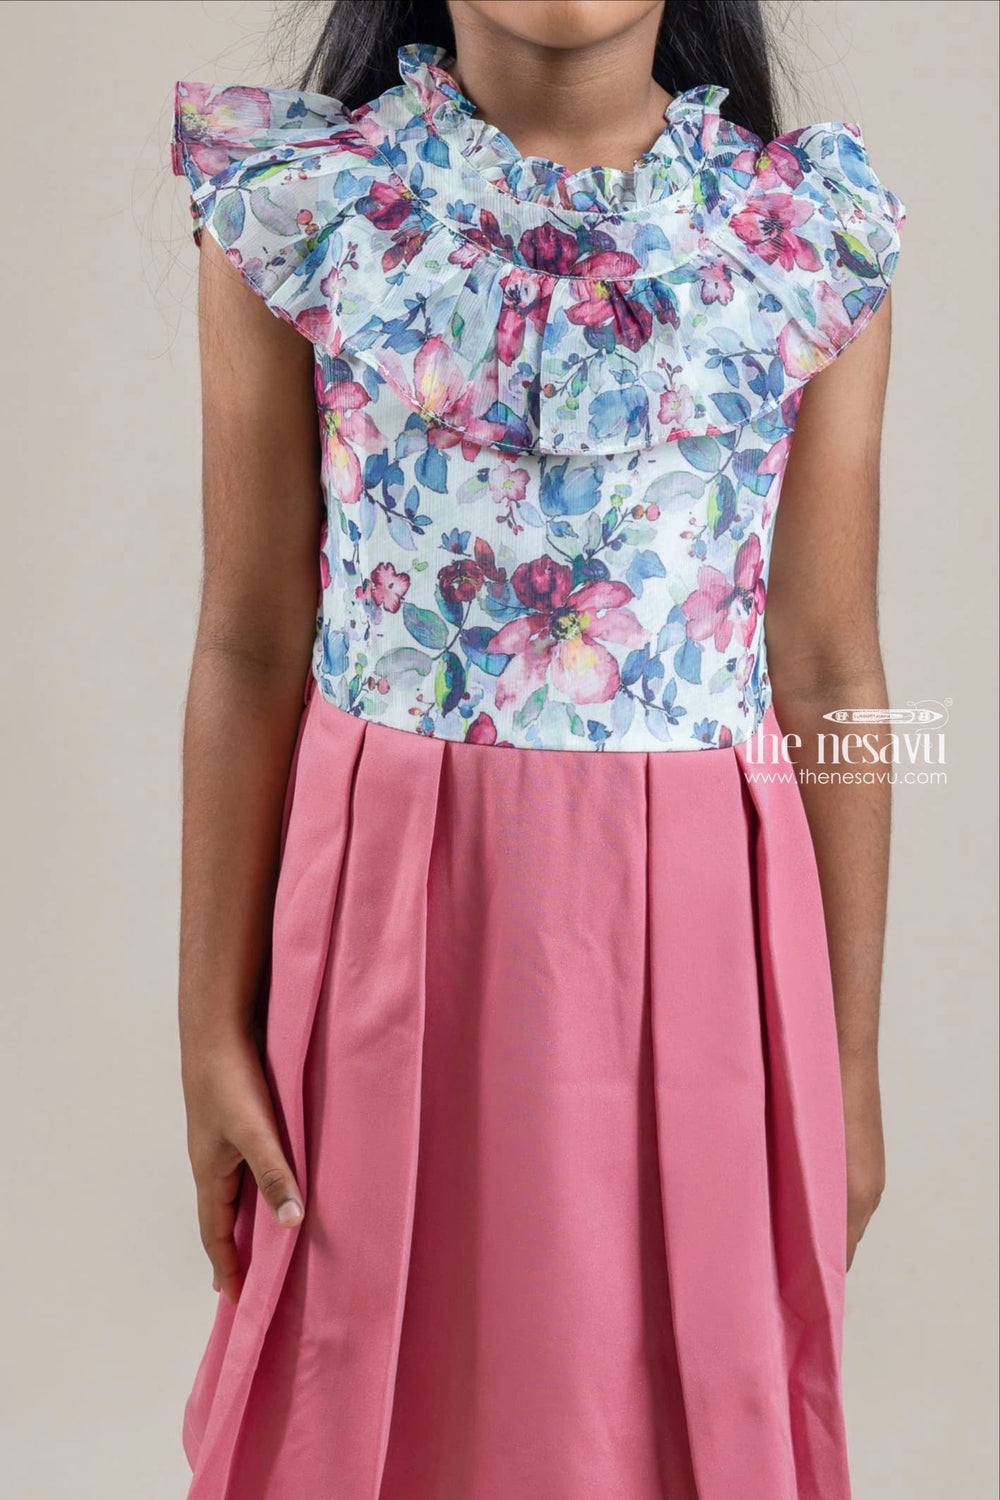 The Nesavu Girls Fancy Frock Floral Printed Flared and Pleated Neck Sleeveless Green Top and Knife Pleated Salmon Pink Skirt with Waist Belt Nesavu Green Floral Printed Flared Top and Salmon Pink Knife Pleated Skirt for Girls | The Nesavu